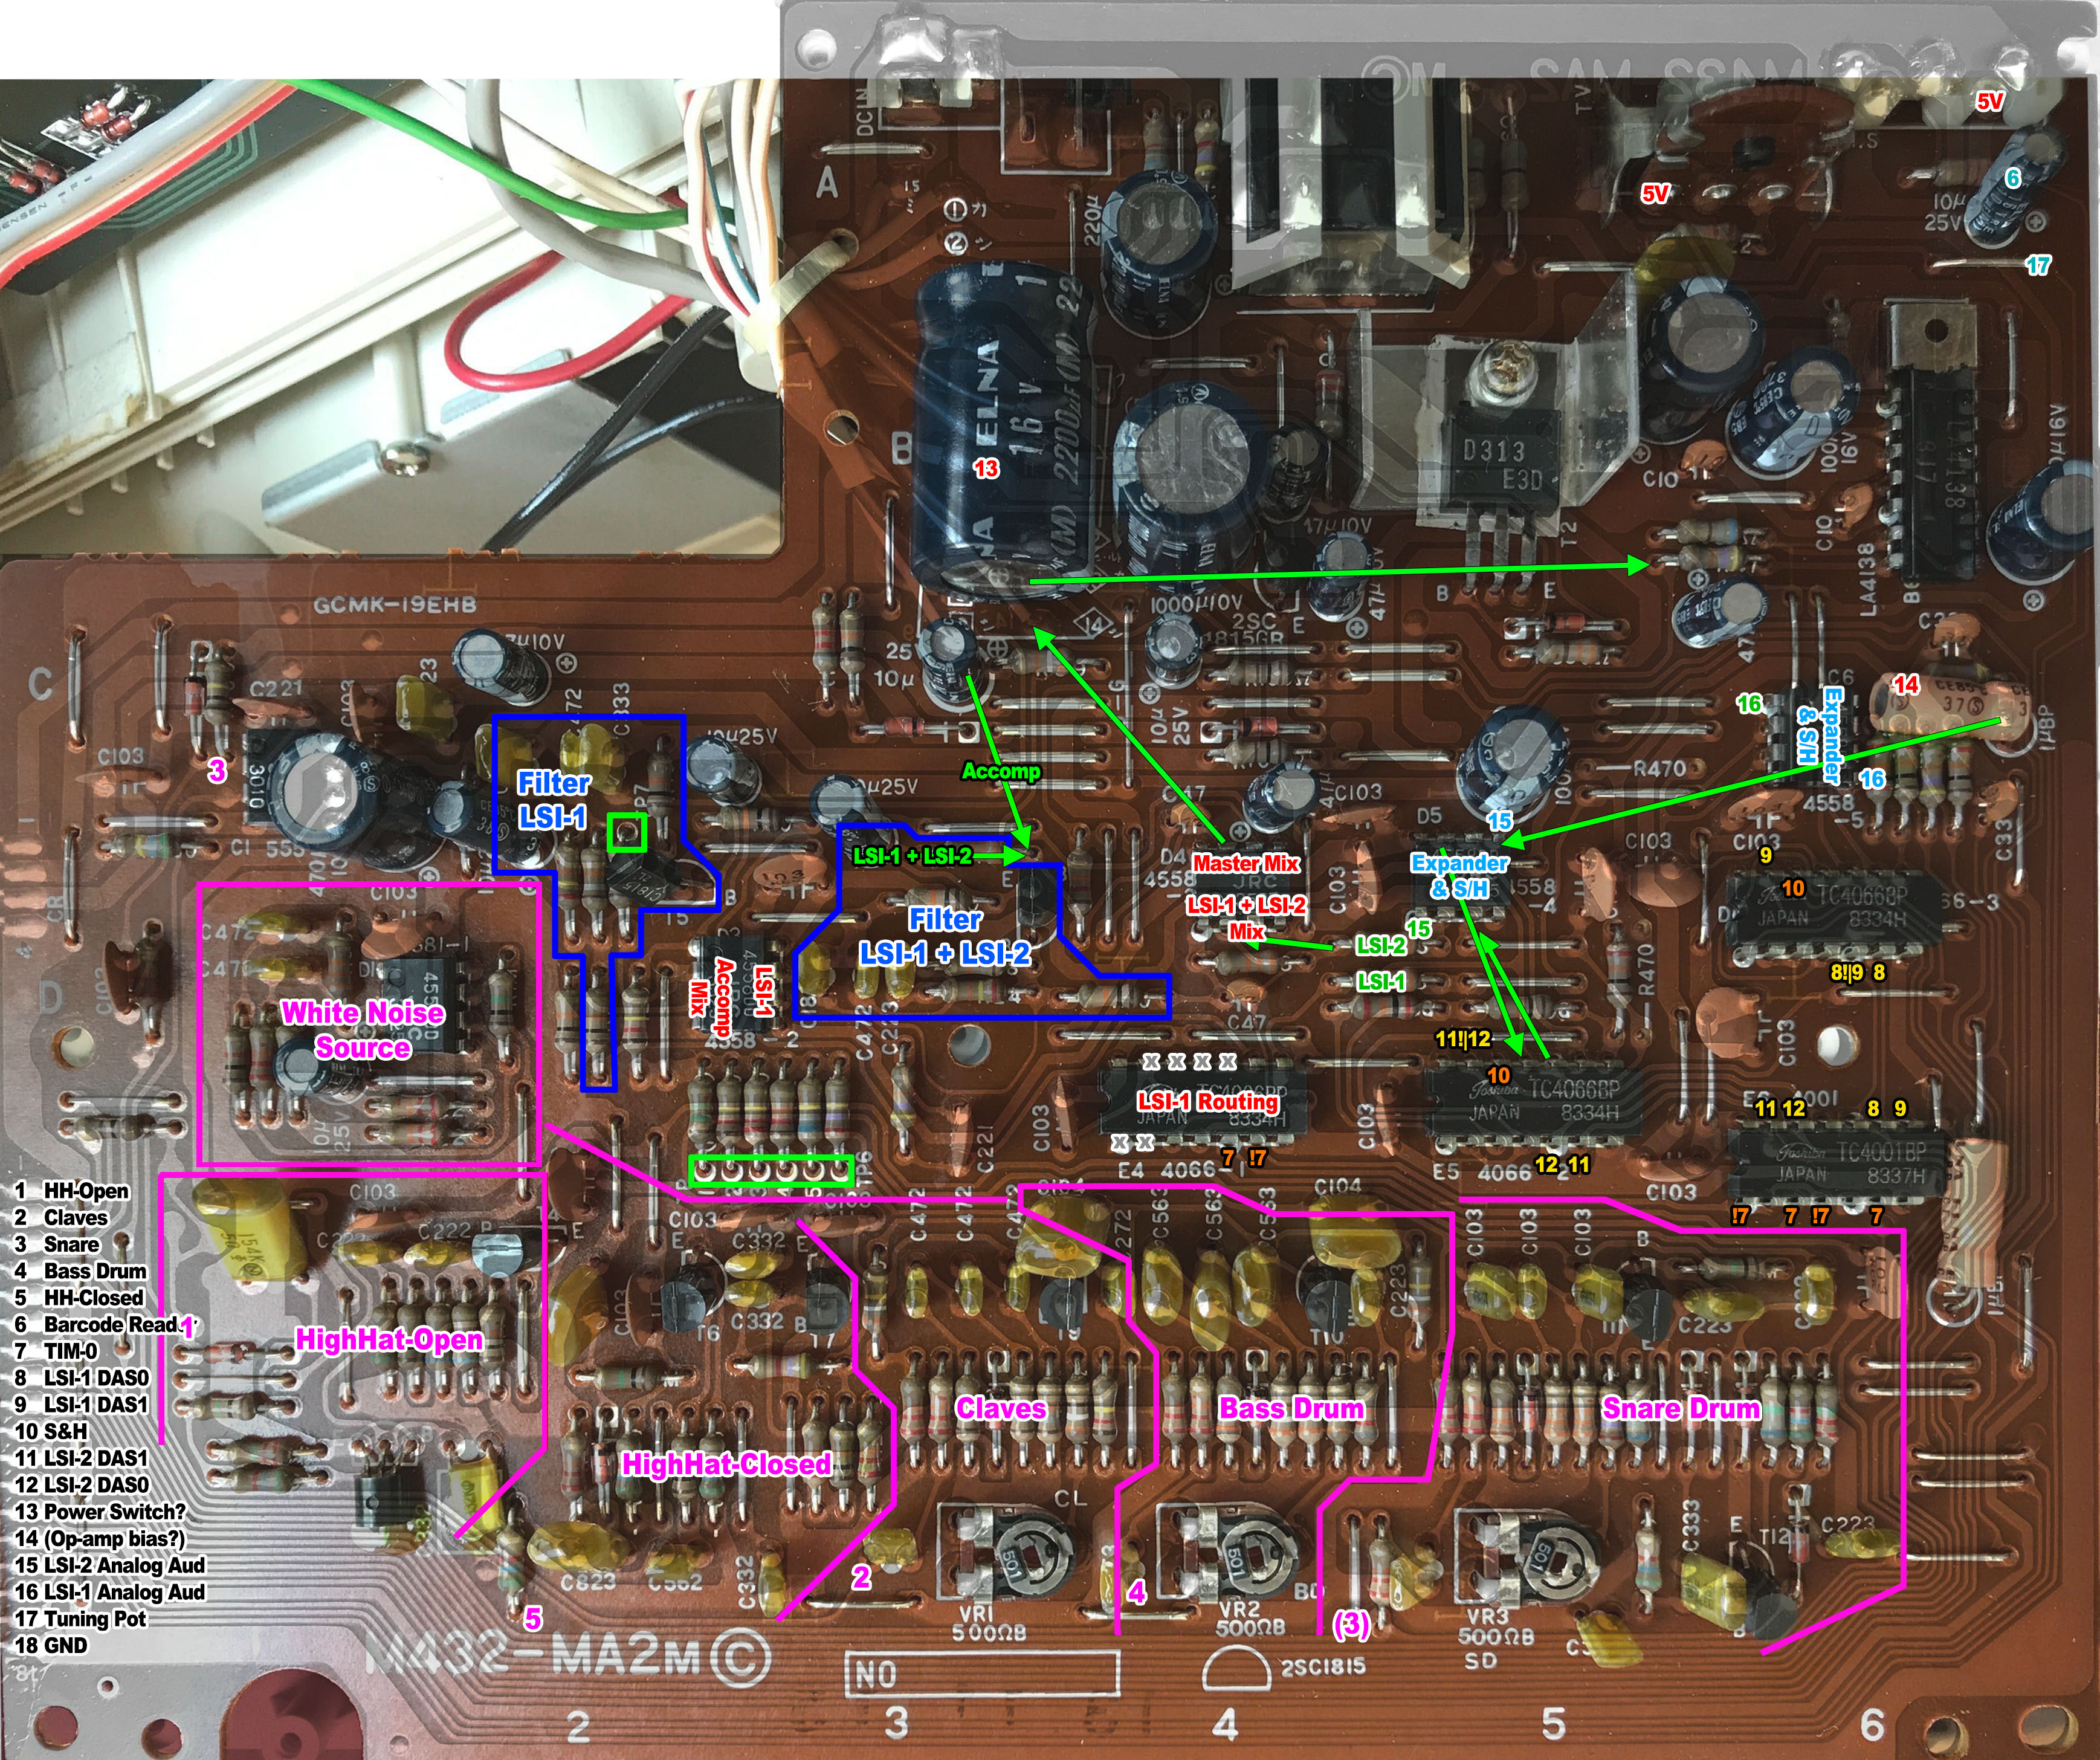 MT-70_Analog_Board_annotated.jpg